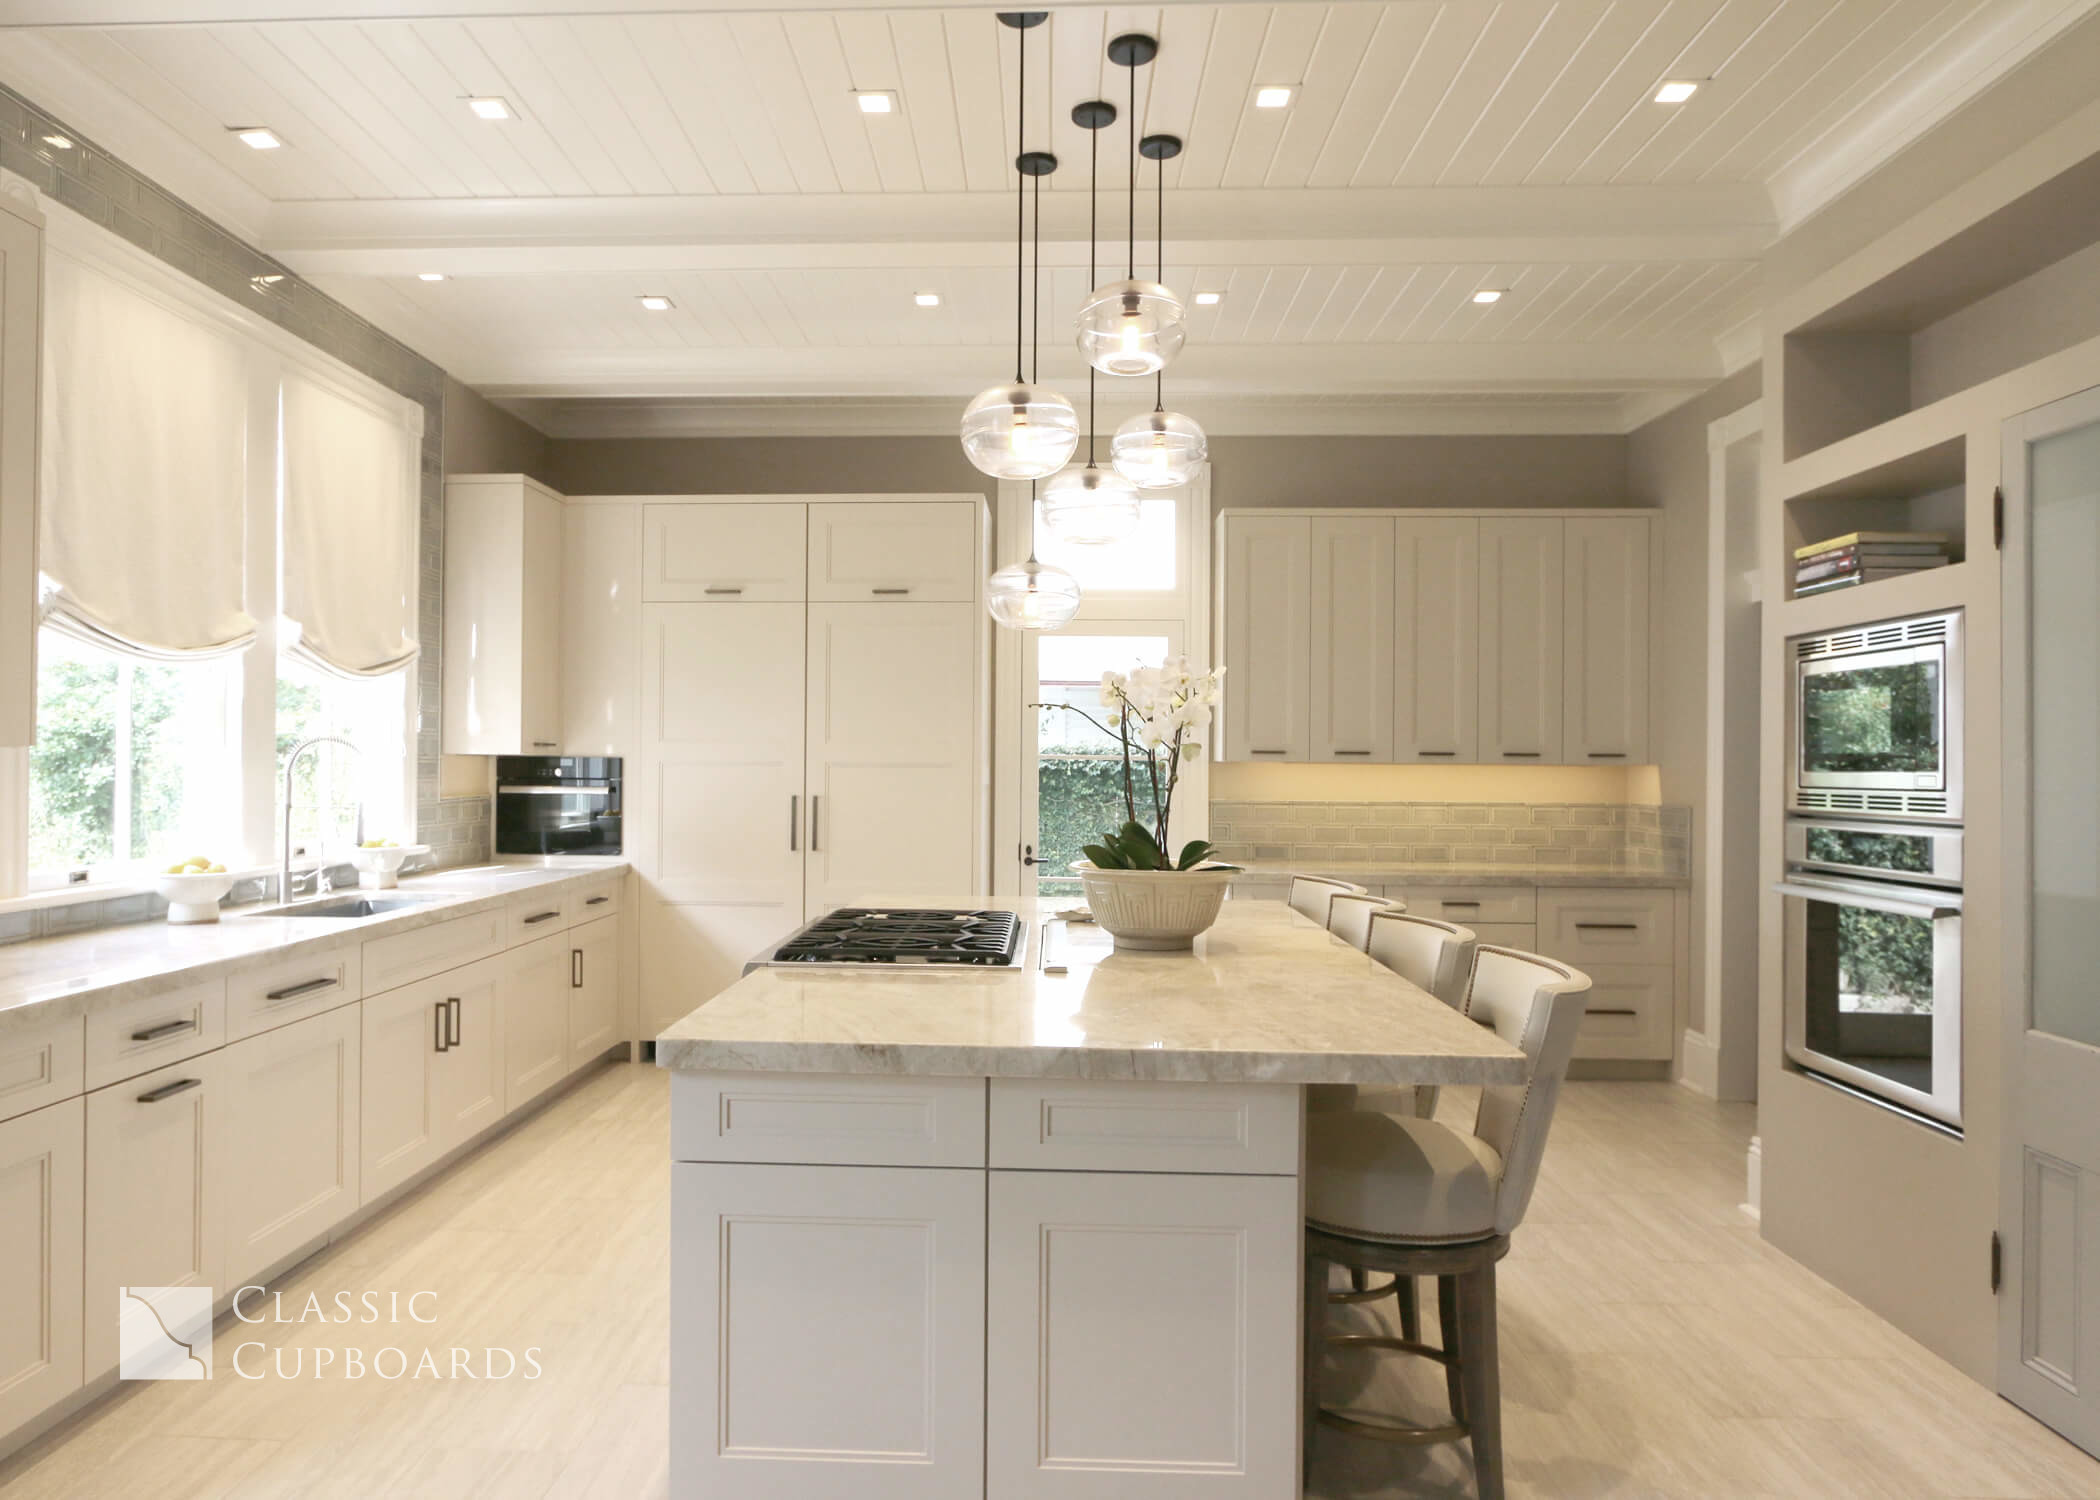 Transitional Kitchen design with neutral colors